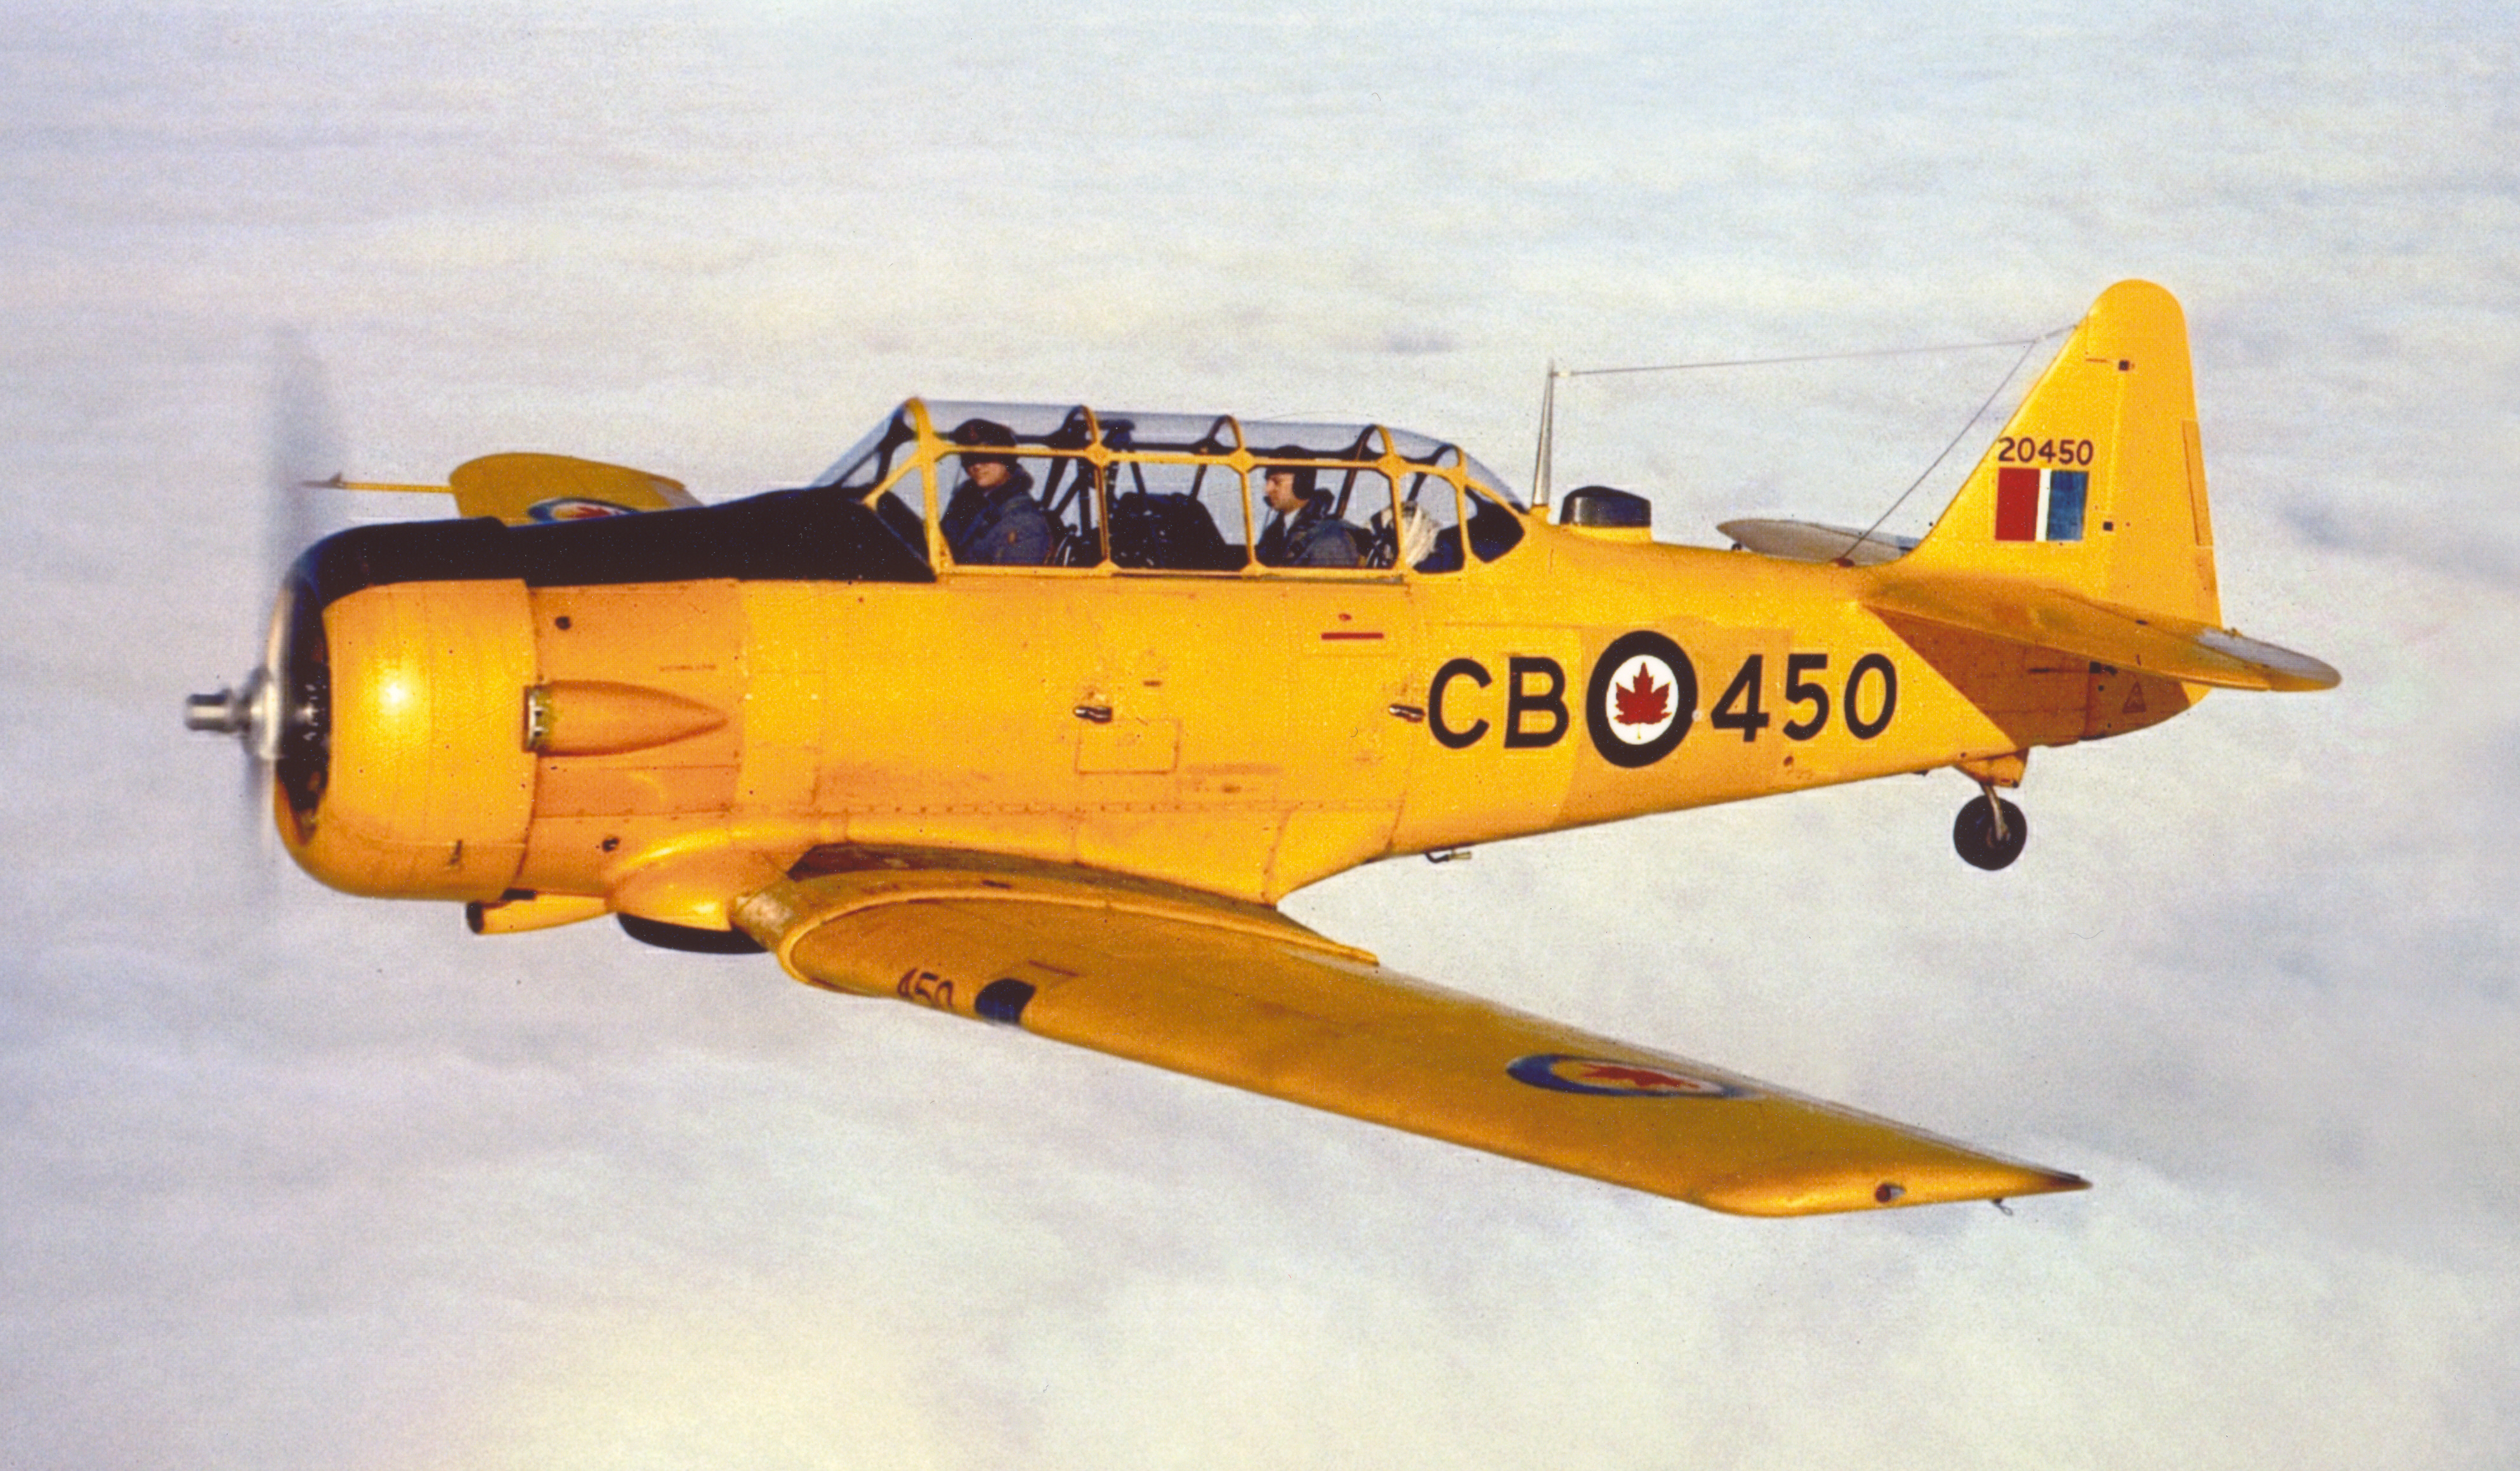 A late-model Harvard in post-war RCAF service. Nicknamed the “Yellow Peril”, the Harvard’s overall yellow paint scheme was mandatory for training aircraft. PHOTO: DND 